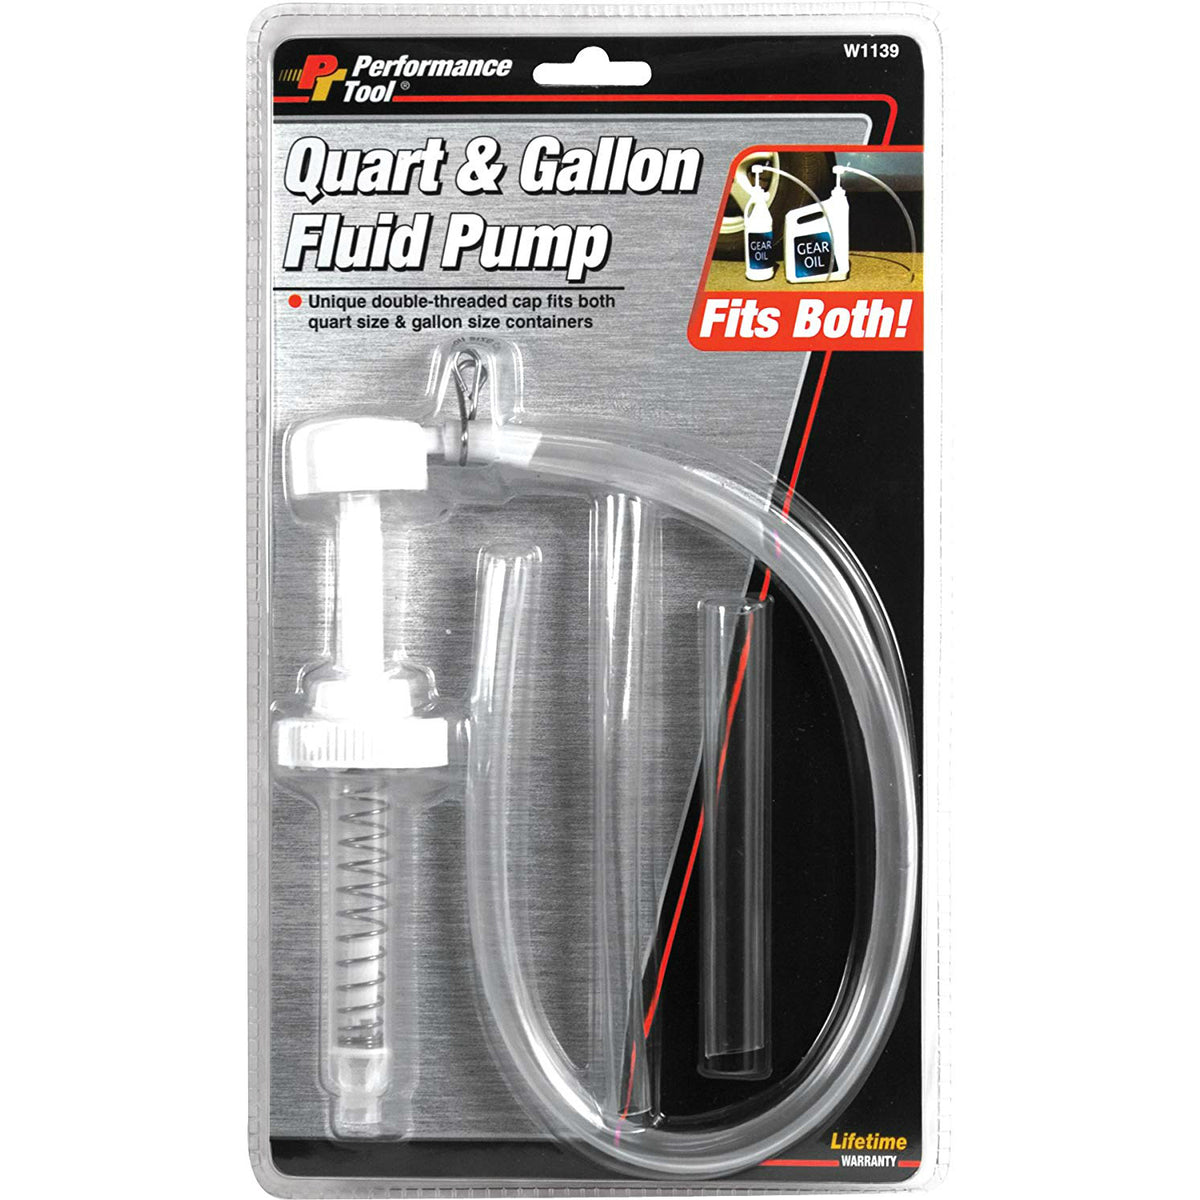 Performance Tool W1139 Fluid Pump Fits Both Quart/Gallon Containers